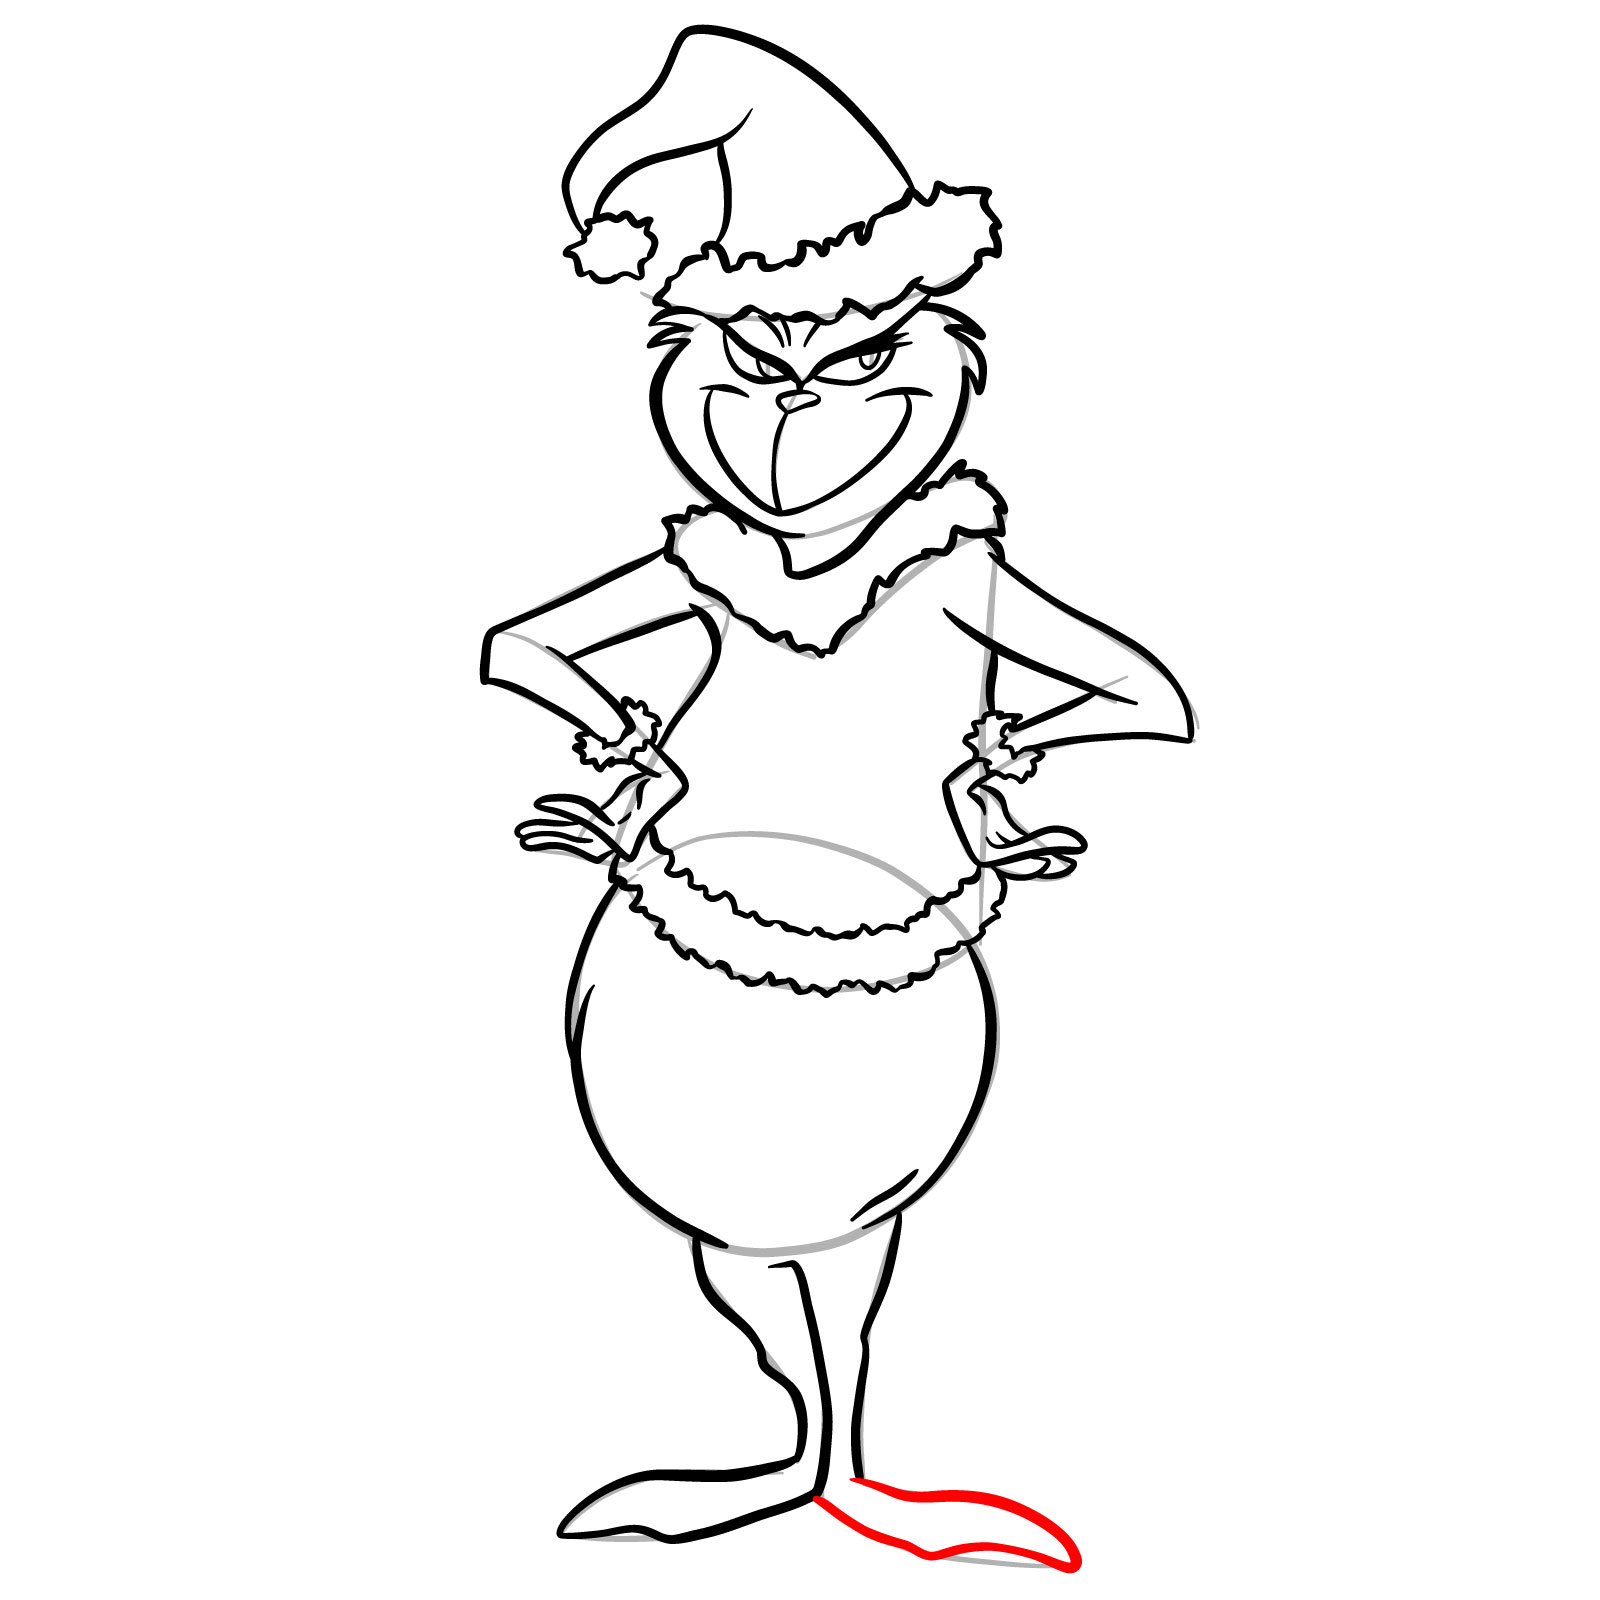 How to draw The Grinch in a Christmas costume - step 26